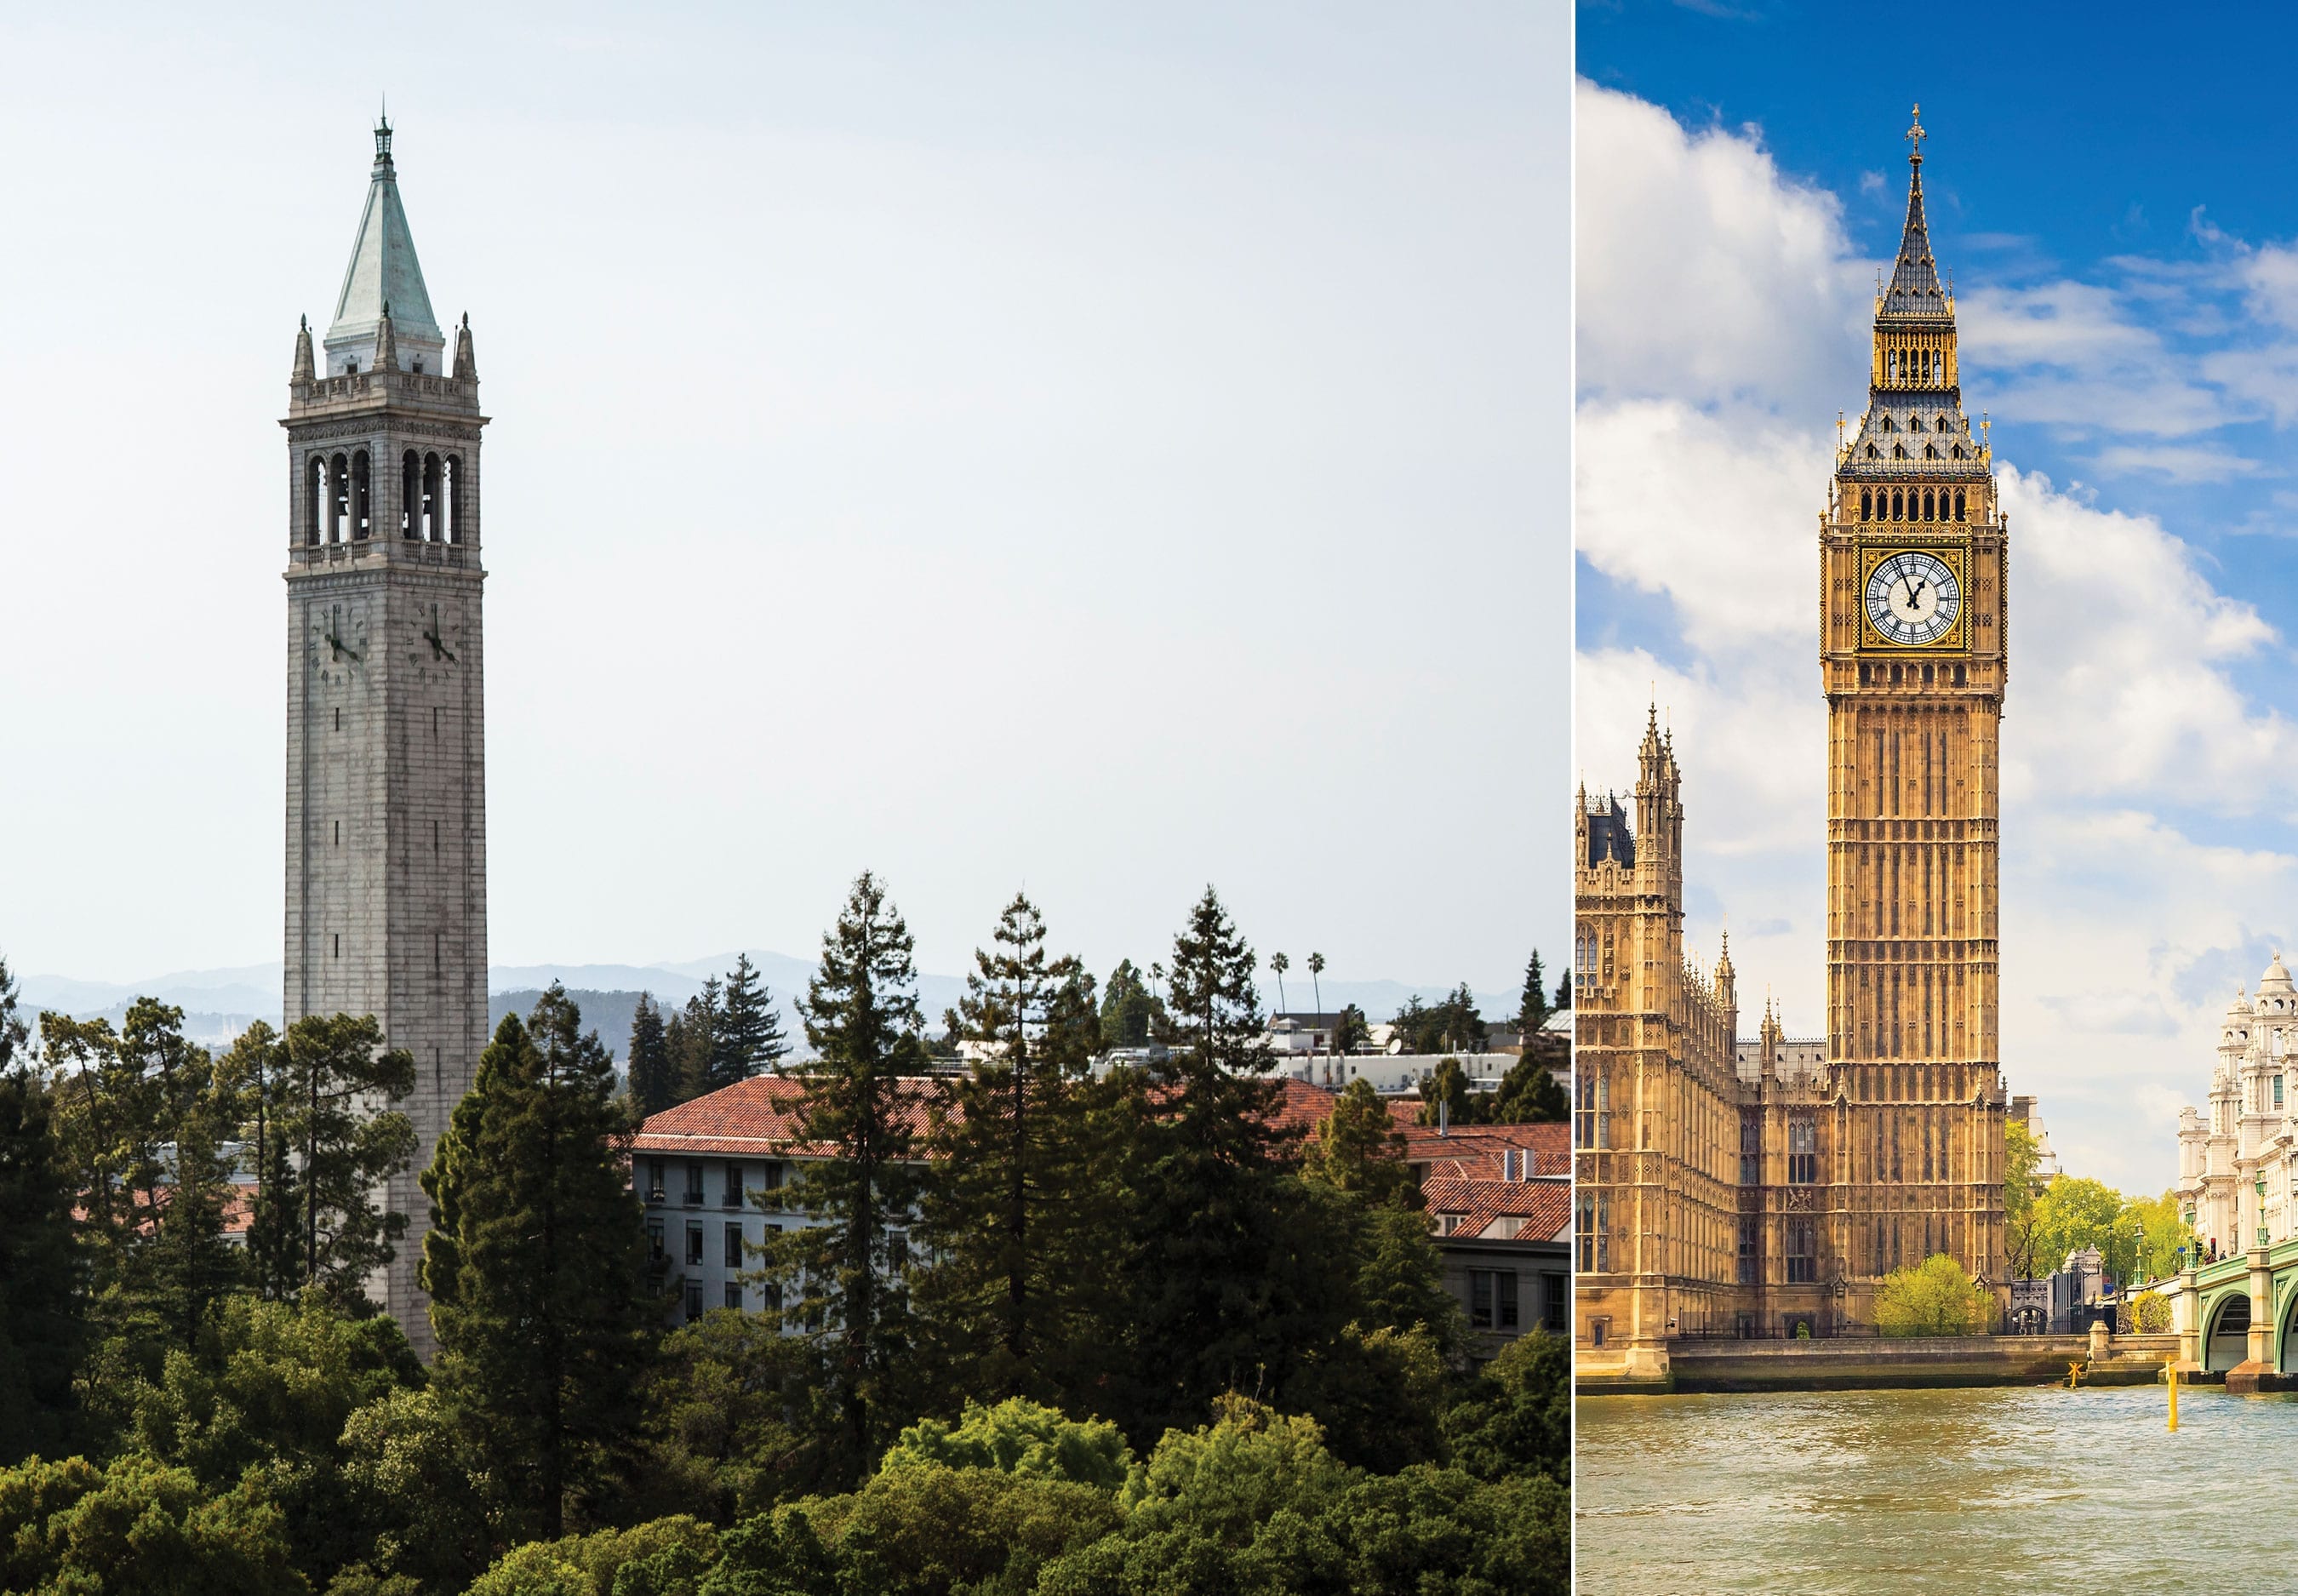 Photo of Campanile on UC Berkeley Campus next to photo of Big Ben in London.